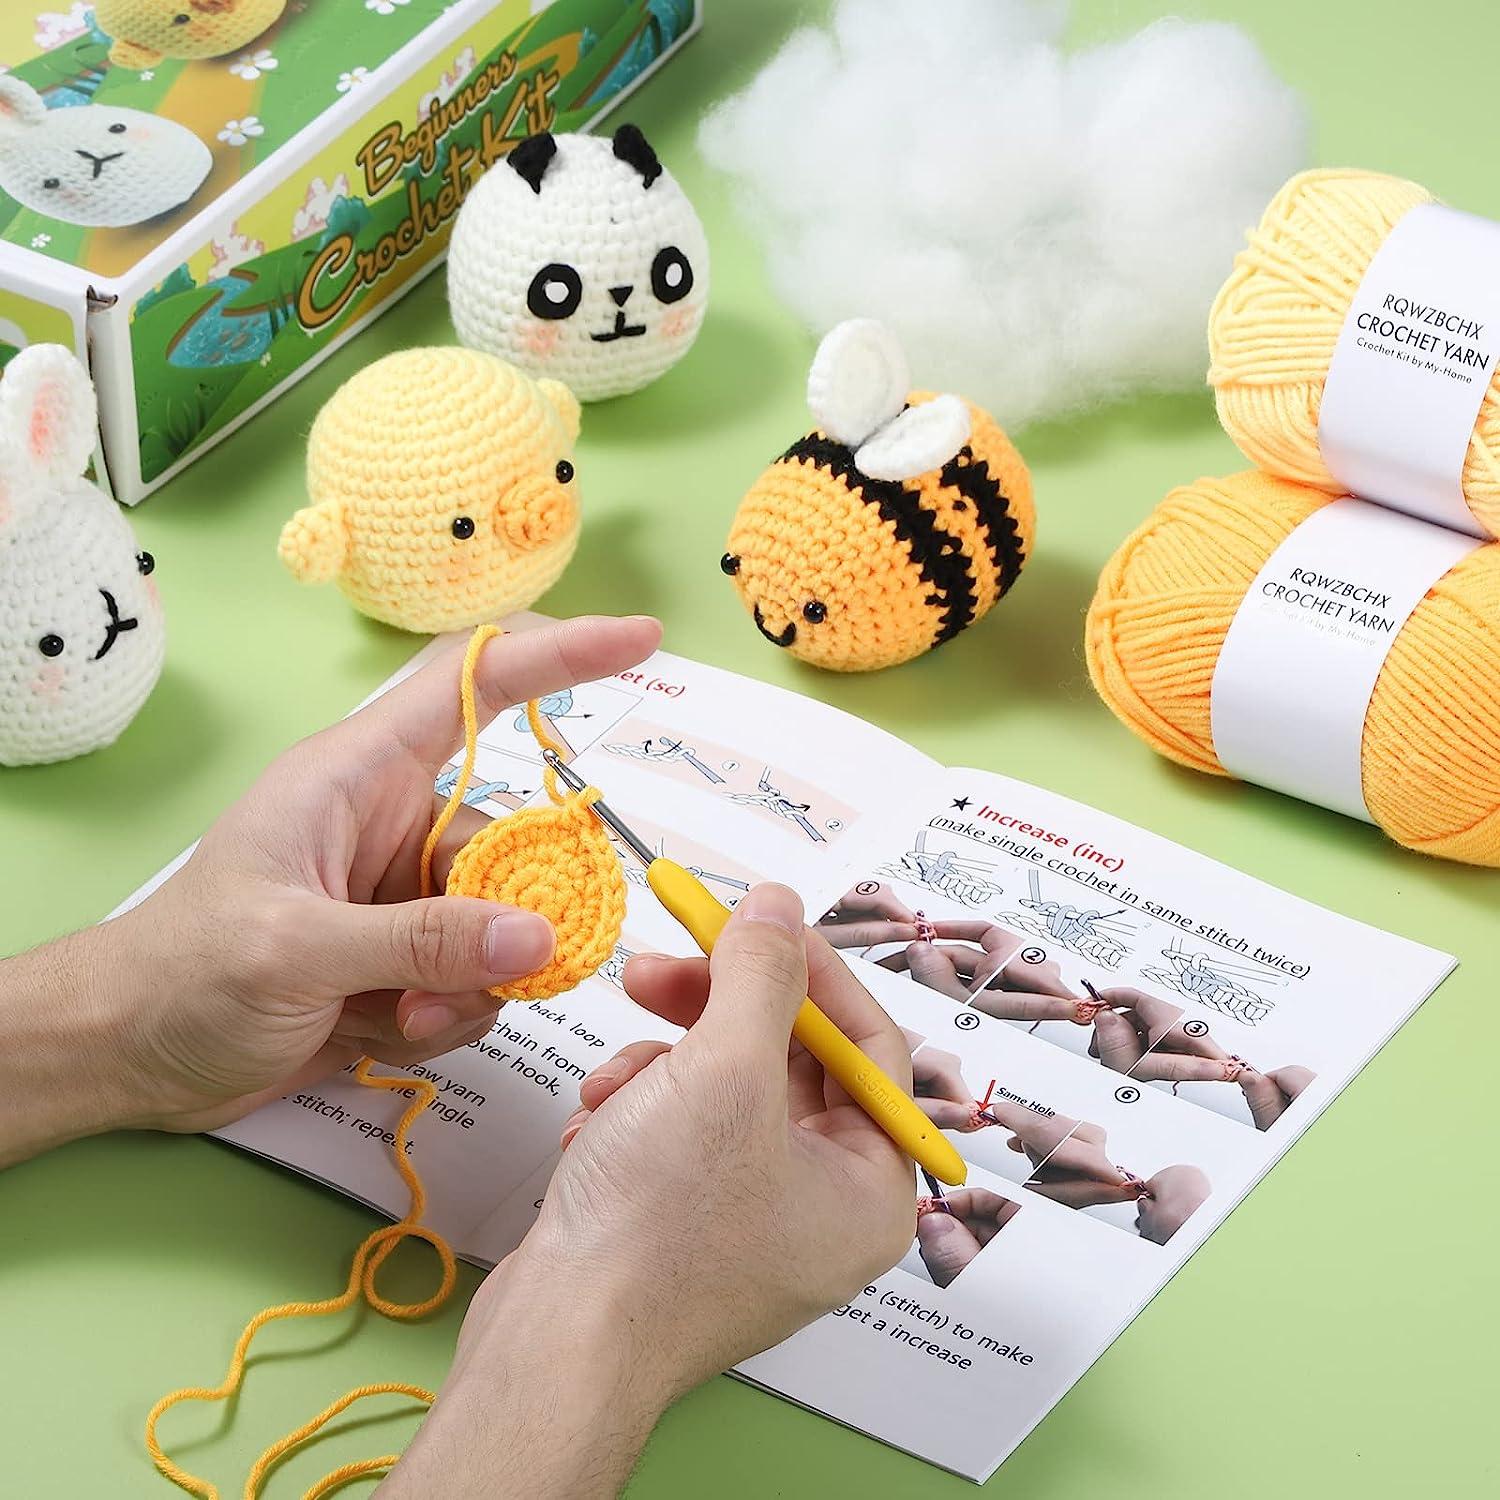 RQWZBCHX 4 Pattern Animals Crochet Kit for Beginners Adult Kids, All in One  Crochet Starters Set Chicken, Whale, Sheep, Dinosaur with Video  Instruction, Yarns, Crochet Hook, Accessories